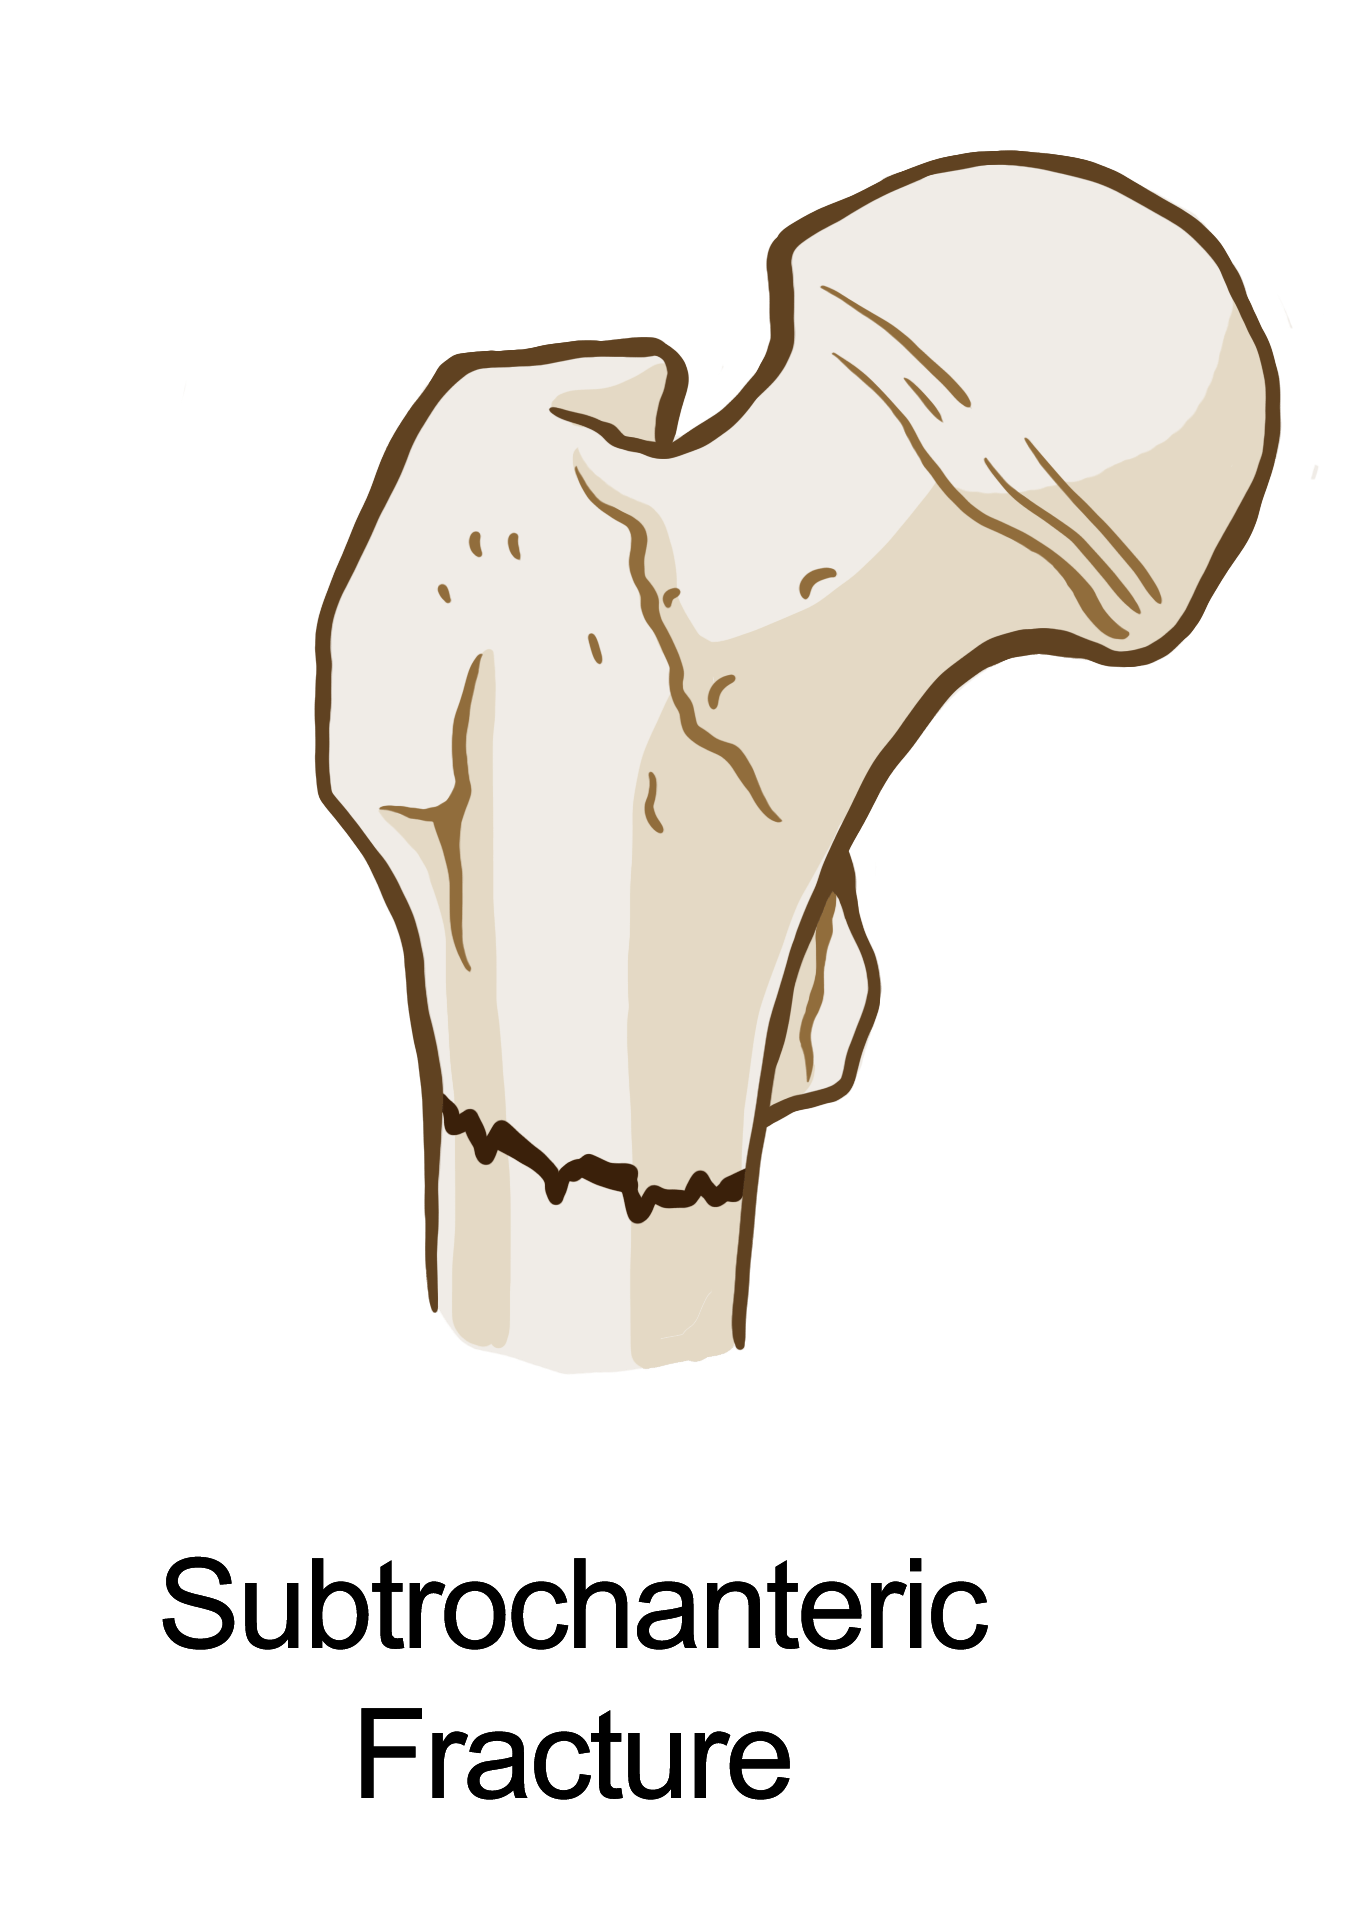 A diagram of a subtrochanteric fracture which is further down the femur.